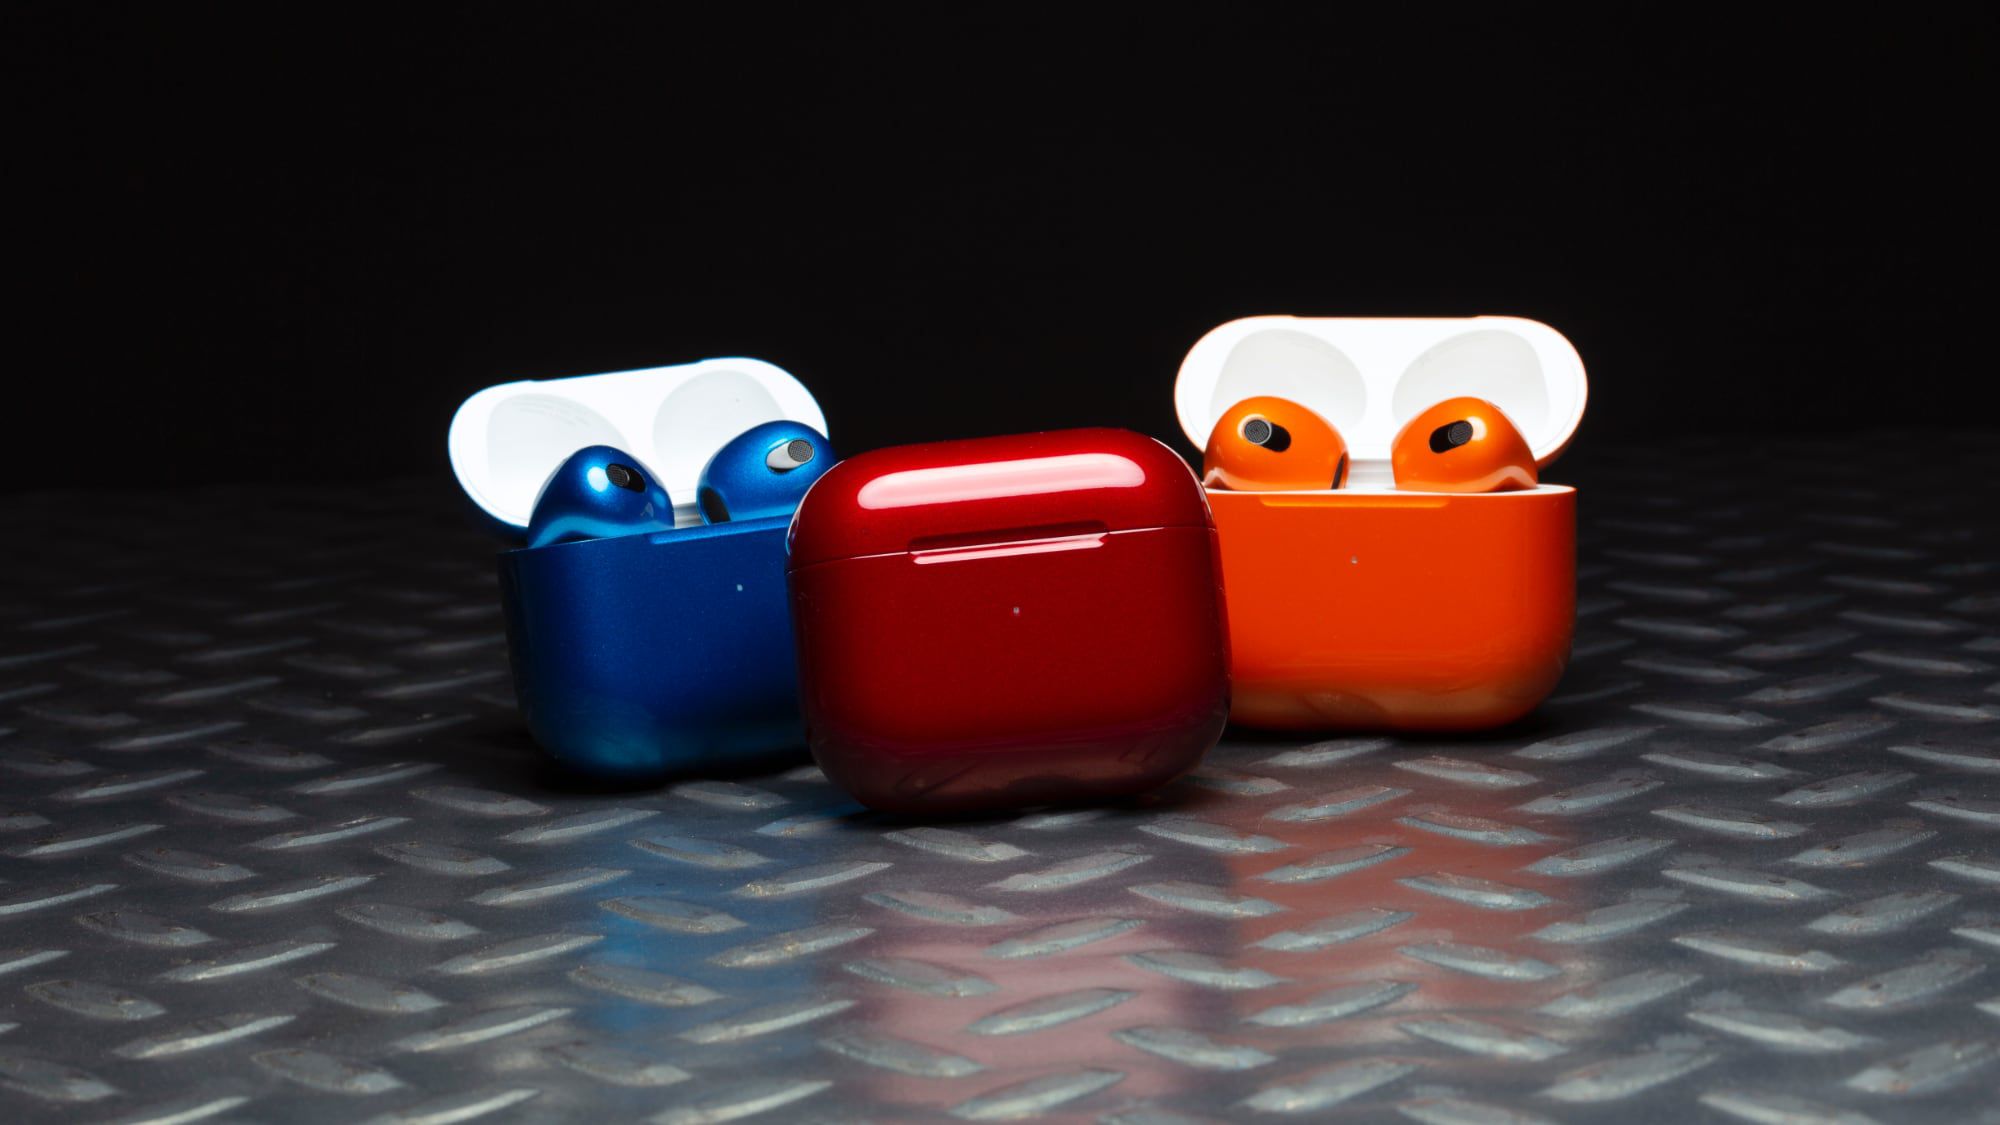 MacRumors Giveaway: Win Customized AirPods in Any Color From ColorWare